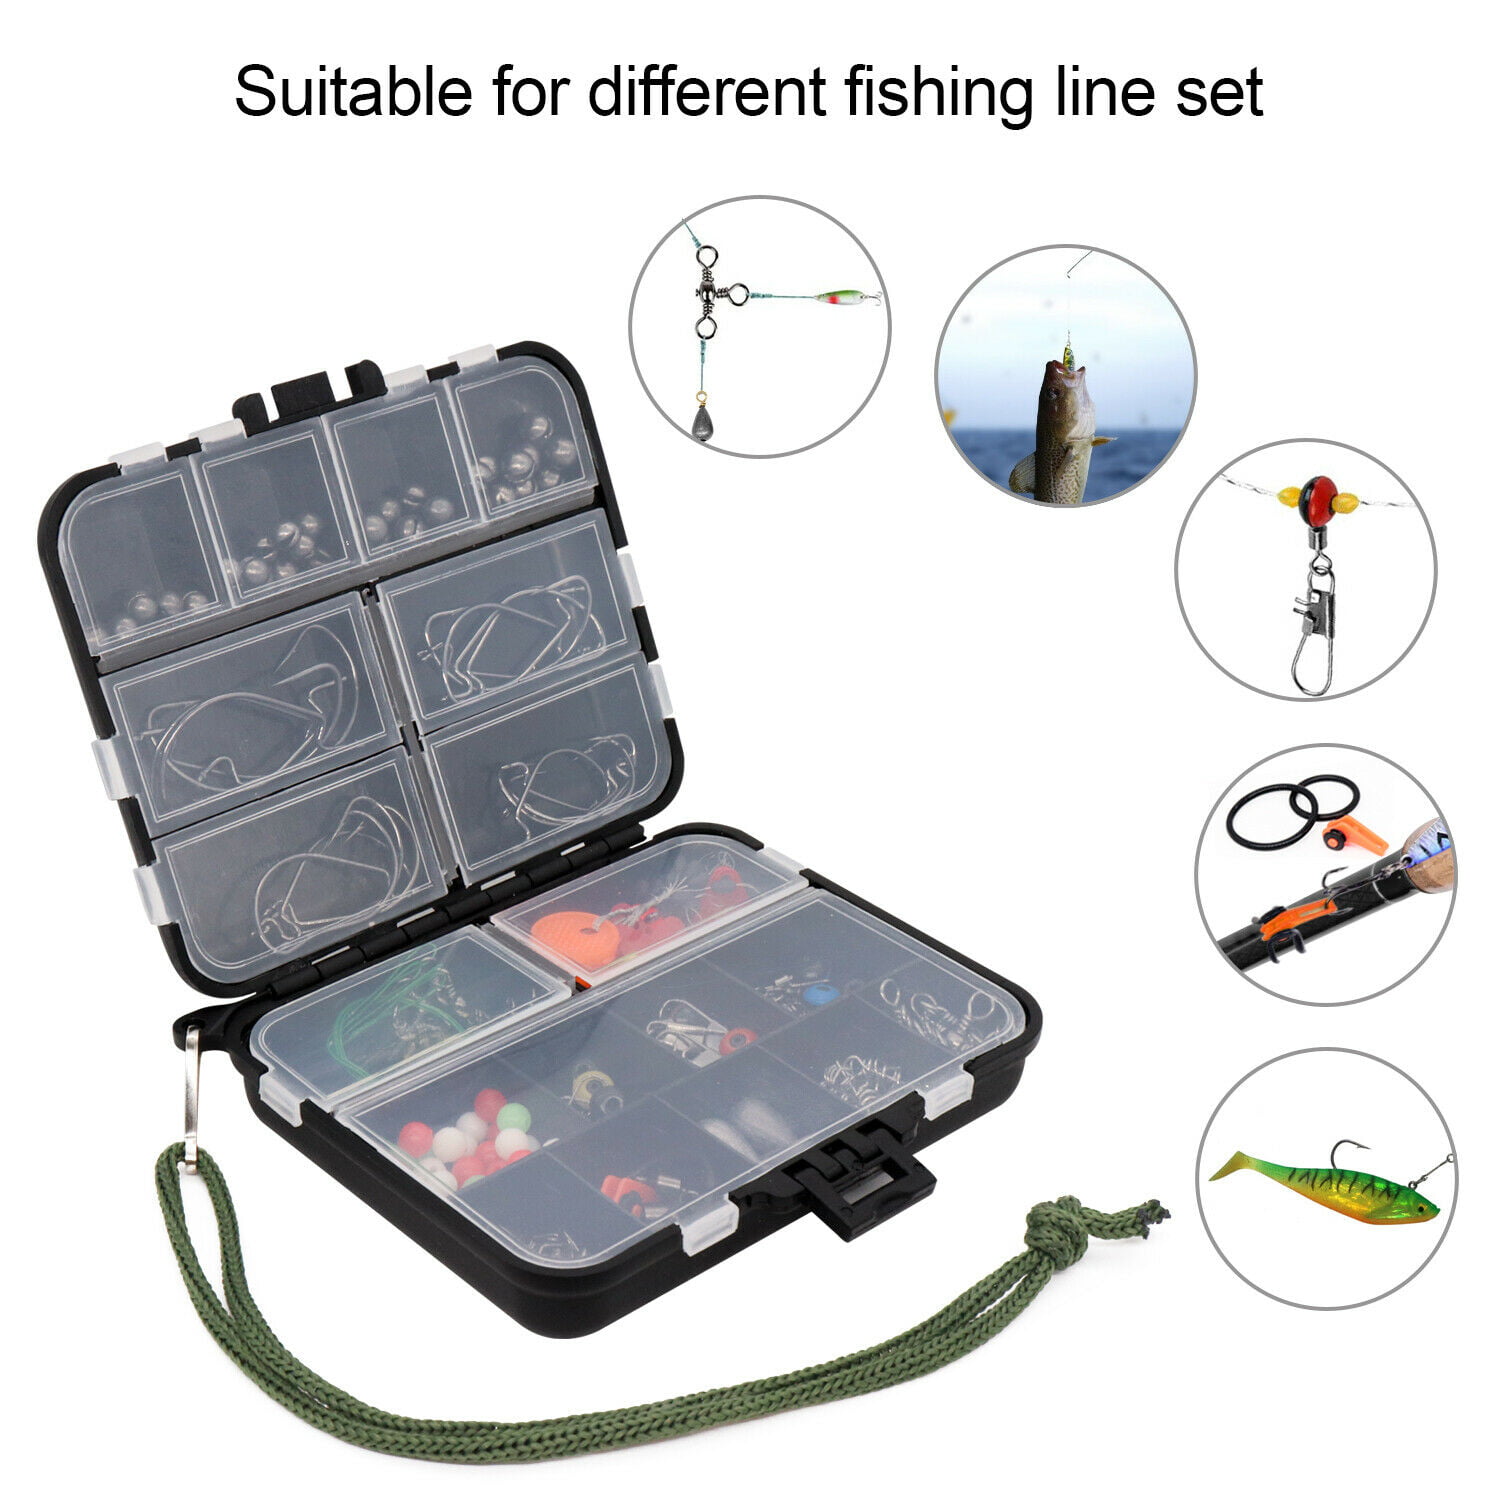 Details about   188PCS Fishing Accessories Kit set with Tackle Box Pliers Jig Hooks Swivels New 